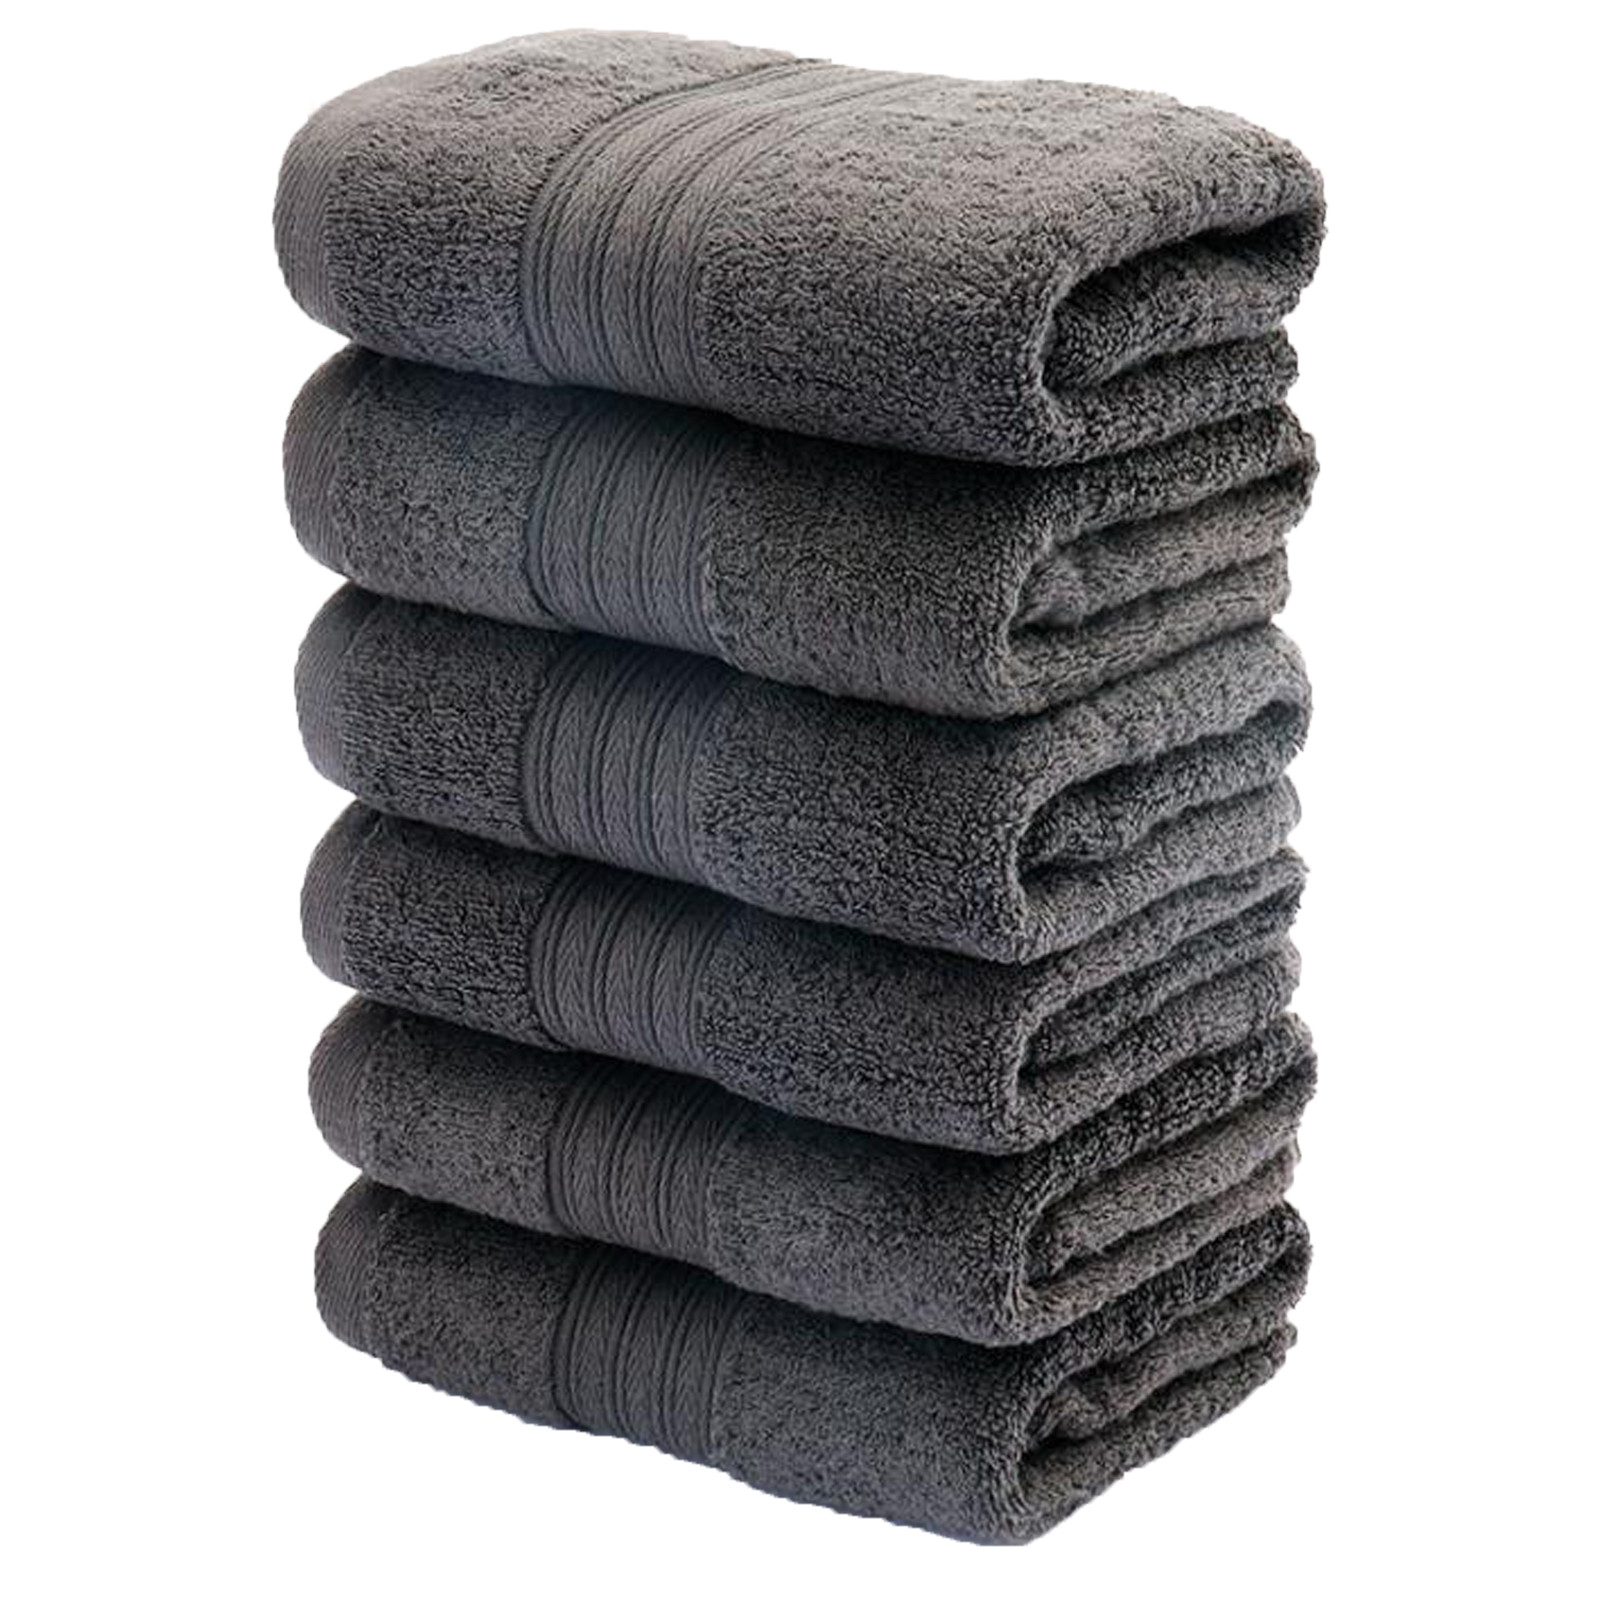 Beppter Home & Garden Bath Towel and Soft Absorbent 6PC Towels Cotton Towels Soft Thick Hand and Absorbent Bathroom Products - image 1 of 4